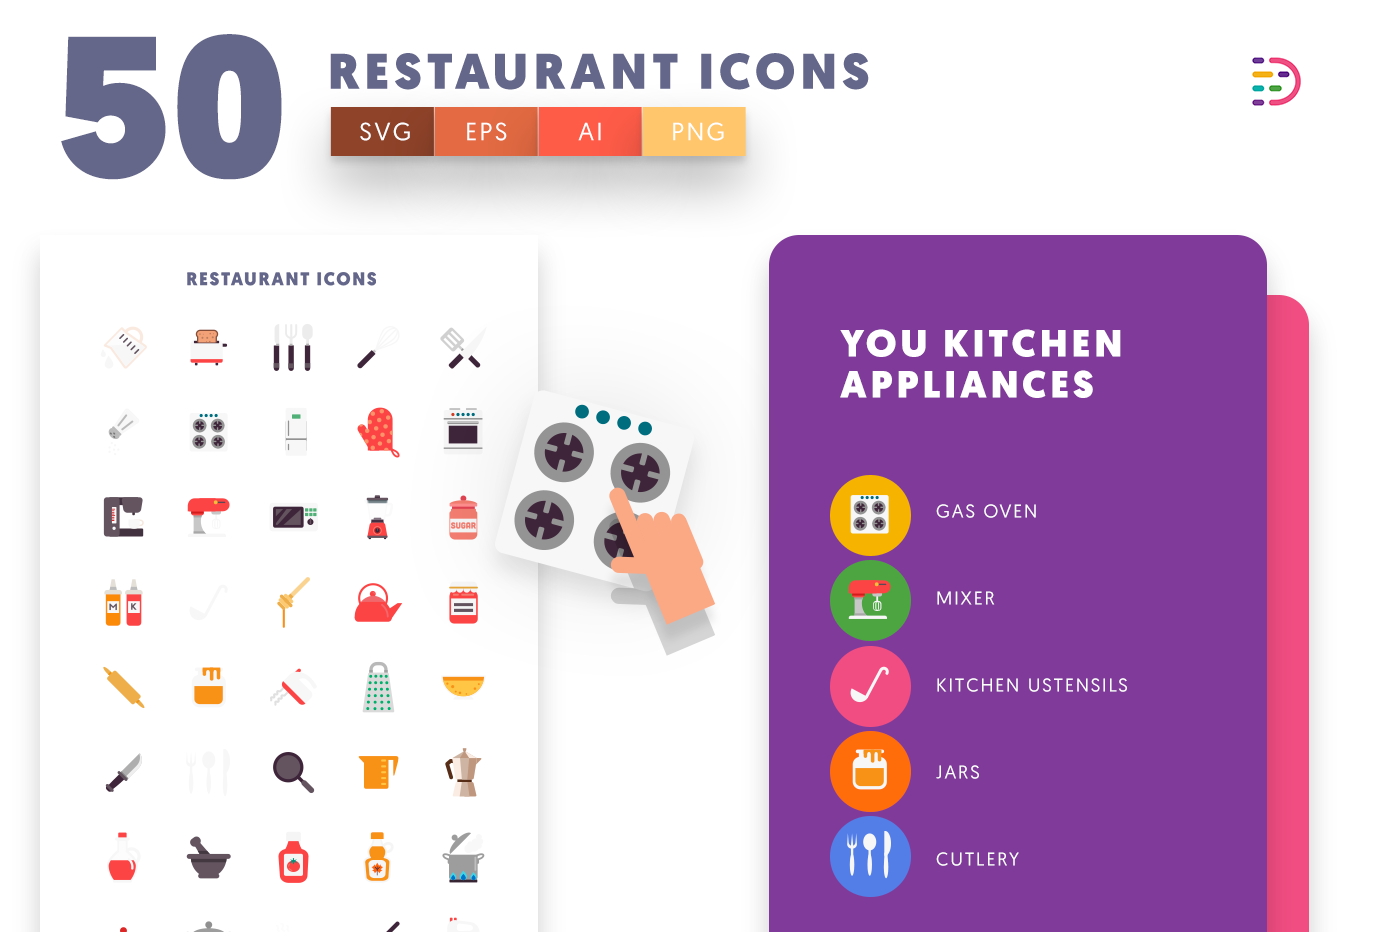 Compatible 50 Restaurant Icons with colored backgrounds